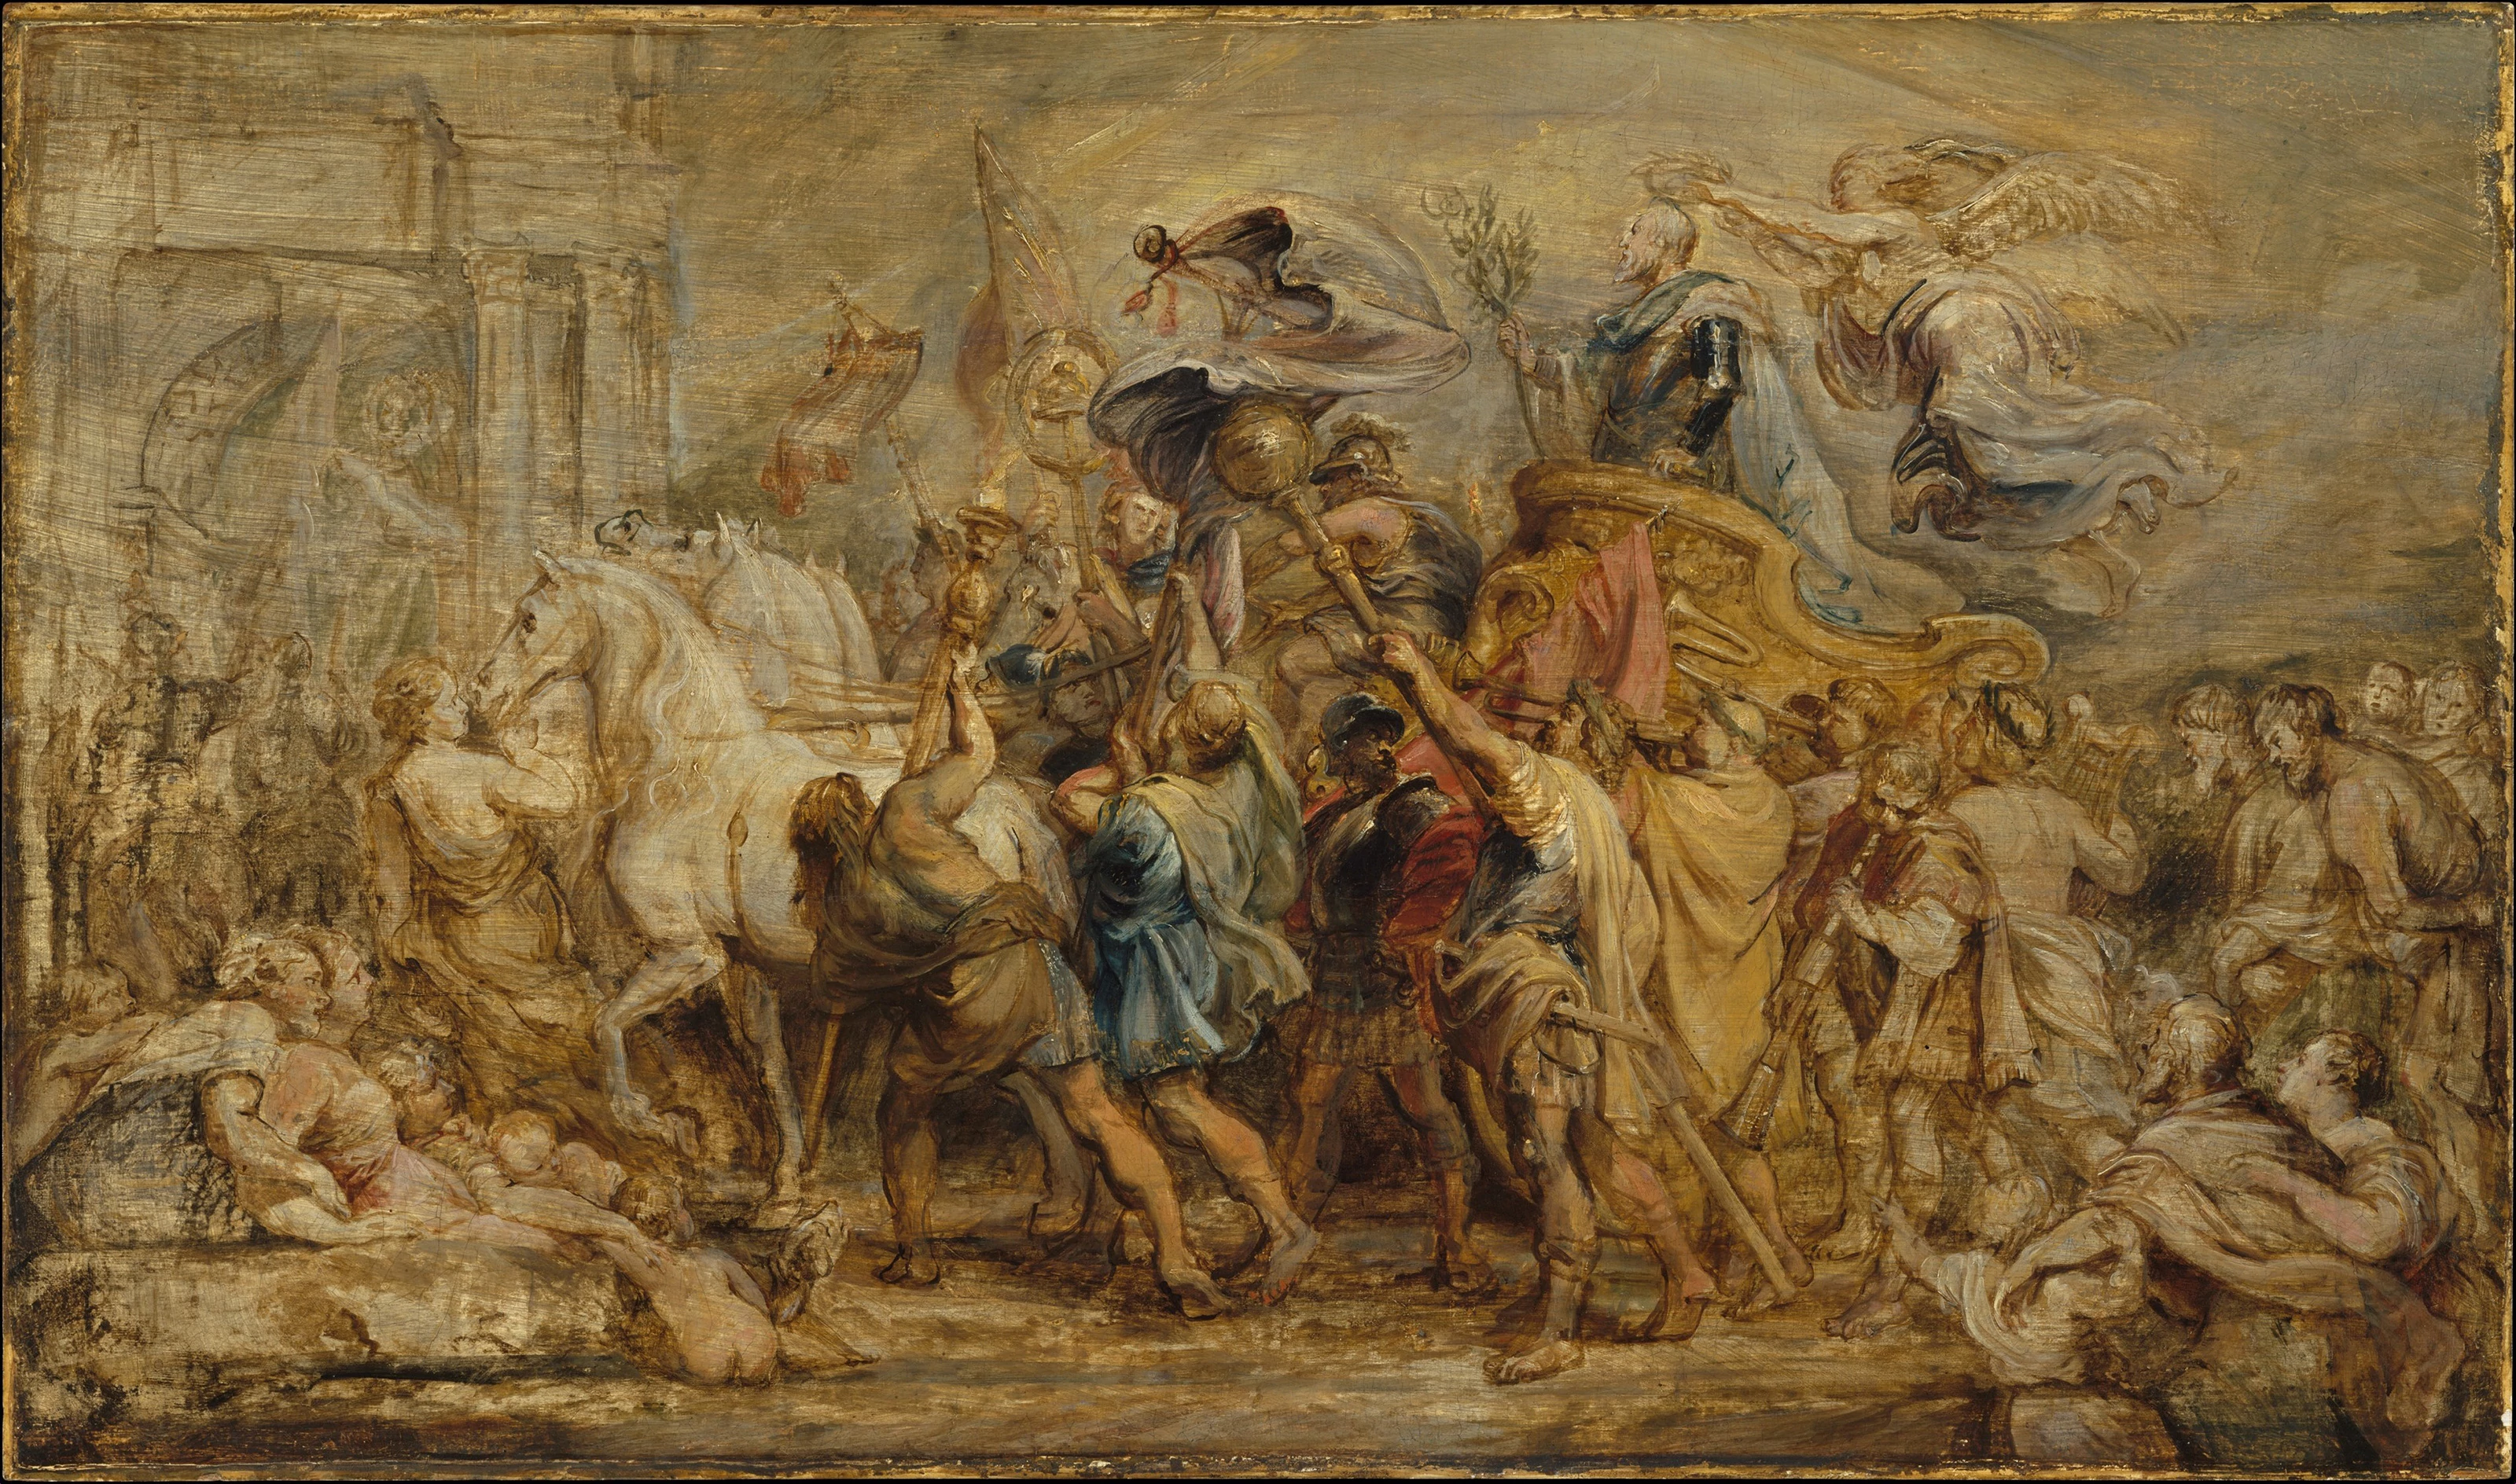 The Triumph of Henry IV, Peter Paul Rubens